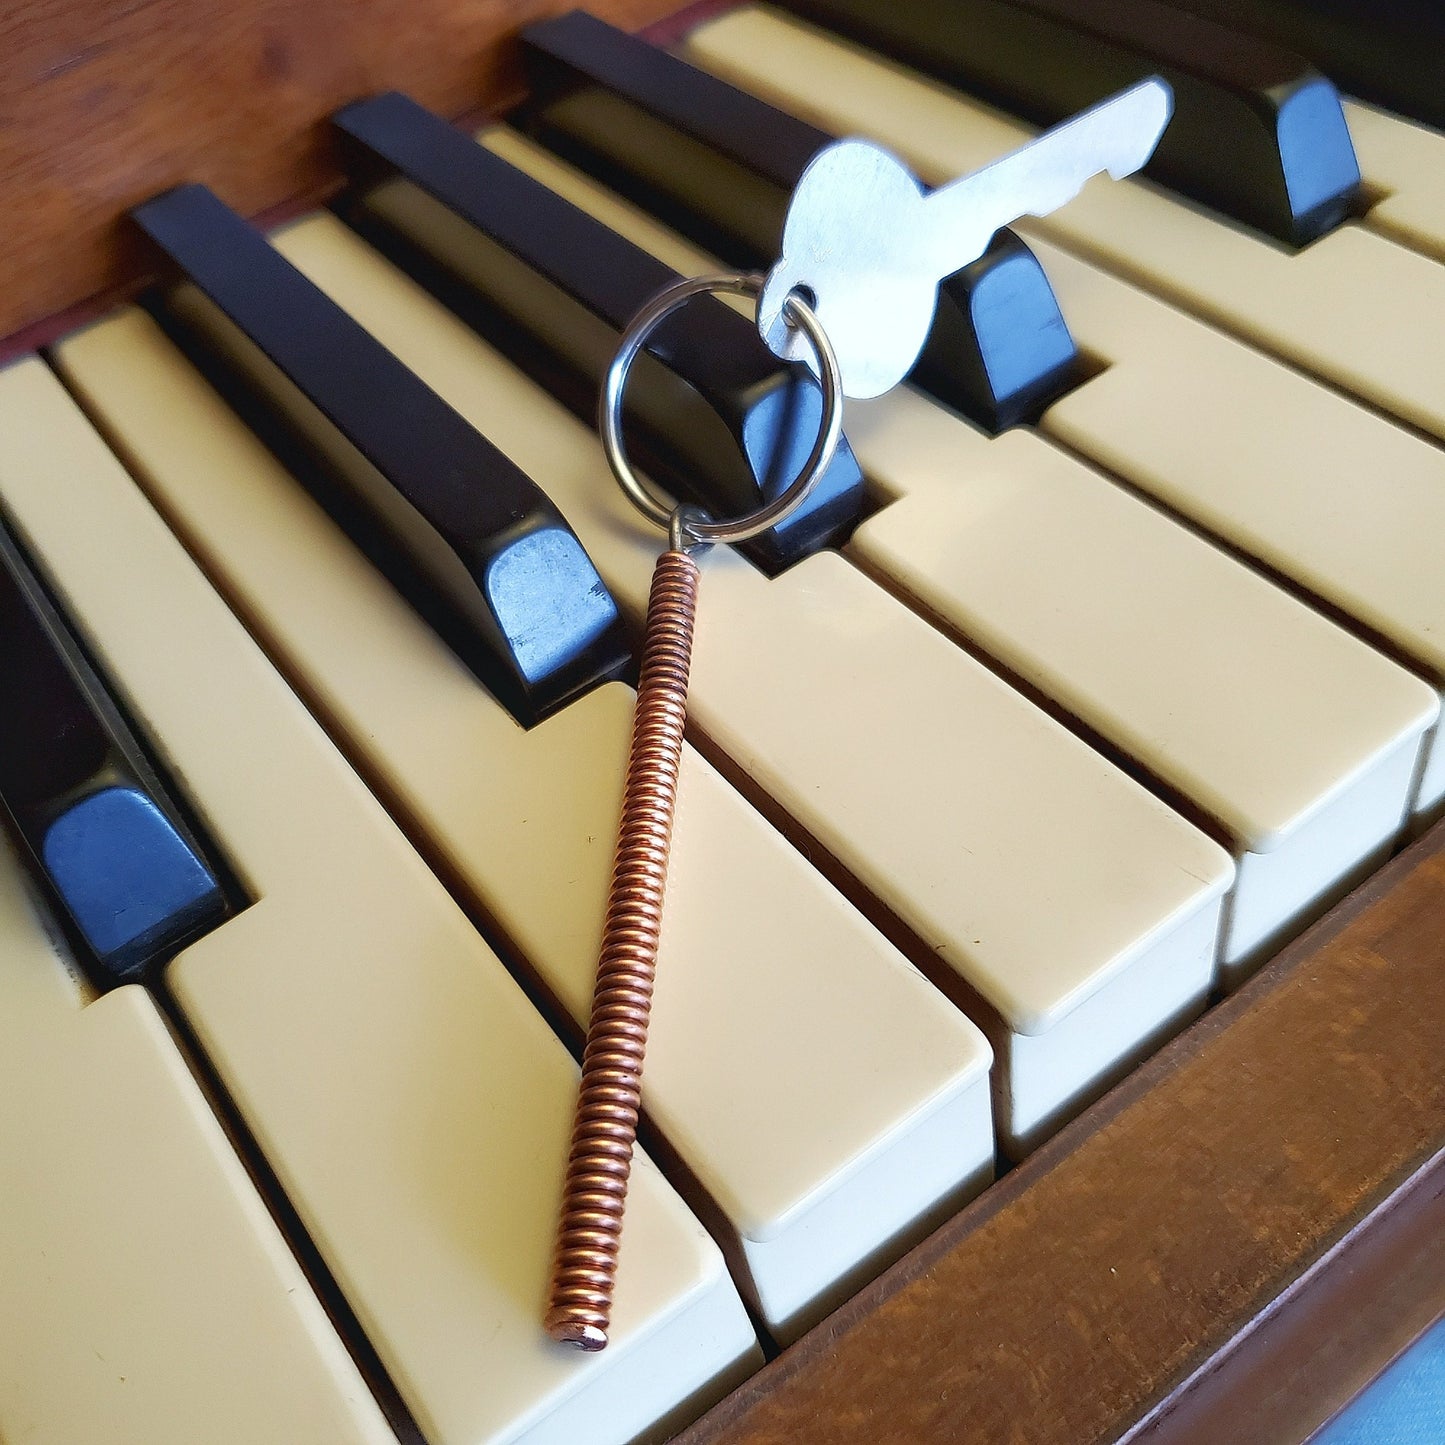 keychain made from a piece of piano string with a key attached, sitting on piano keys